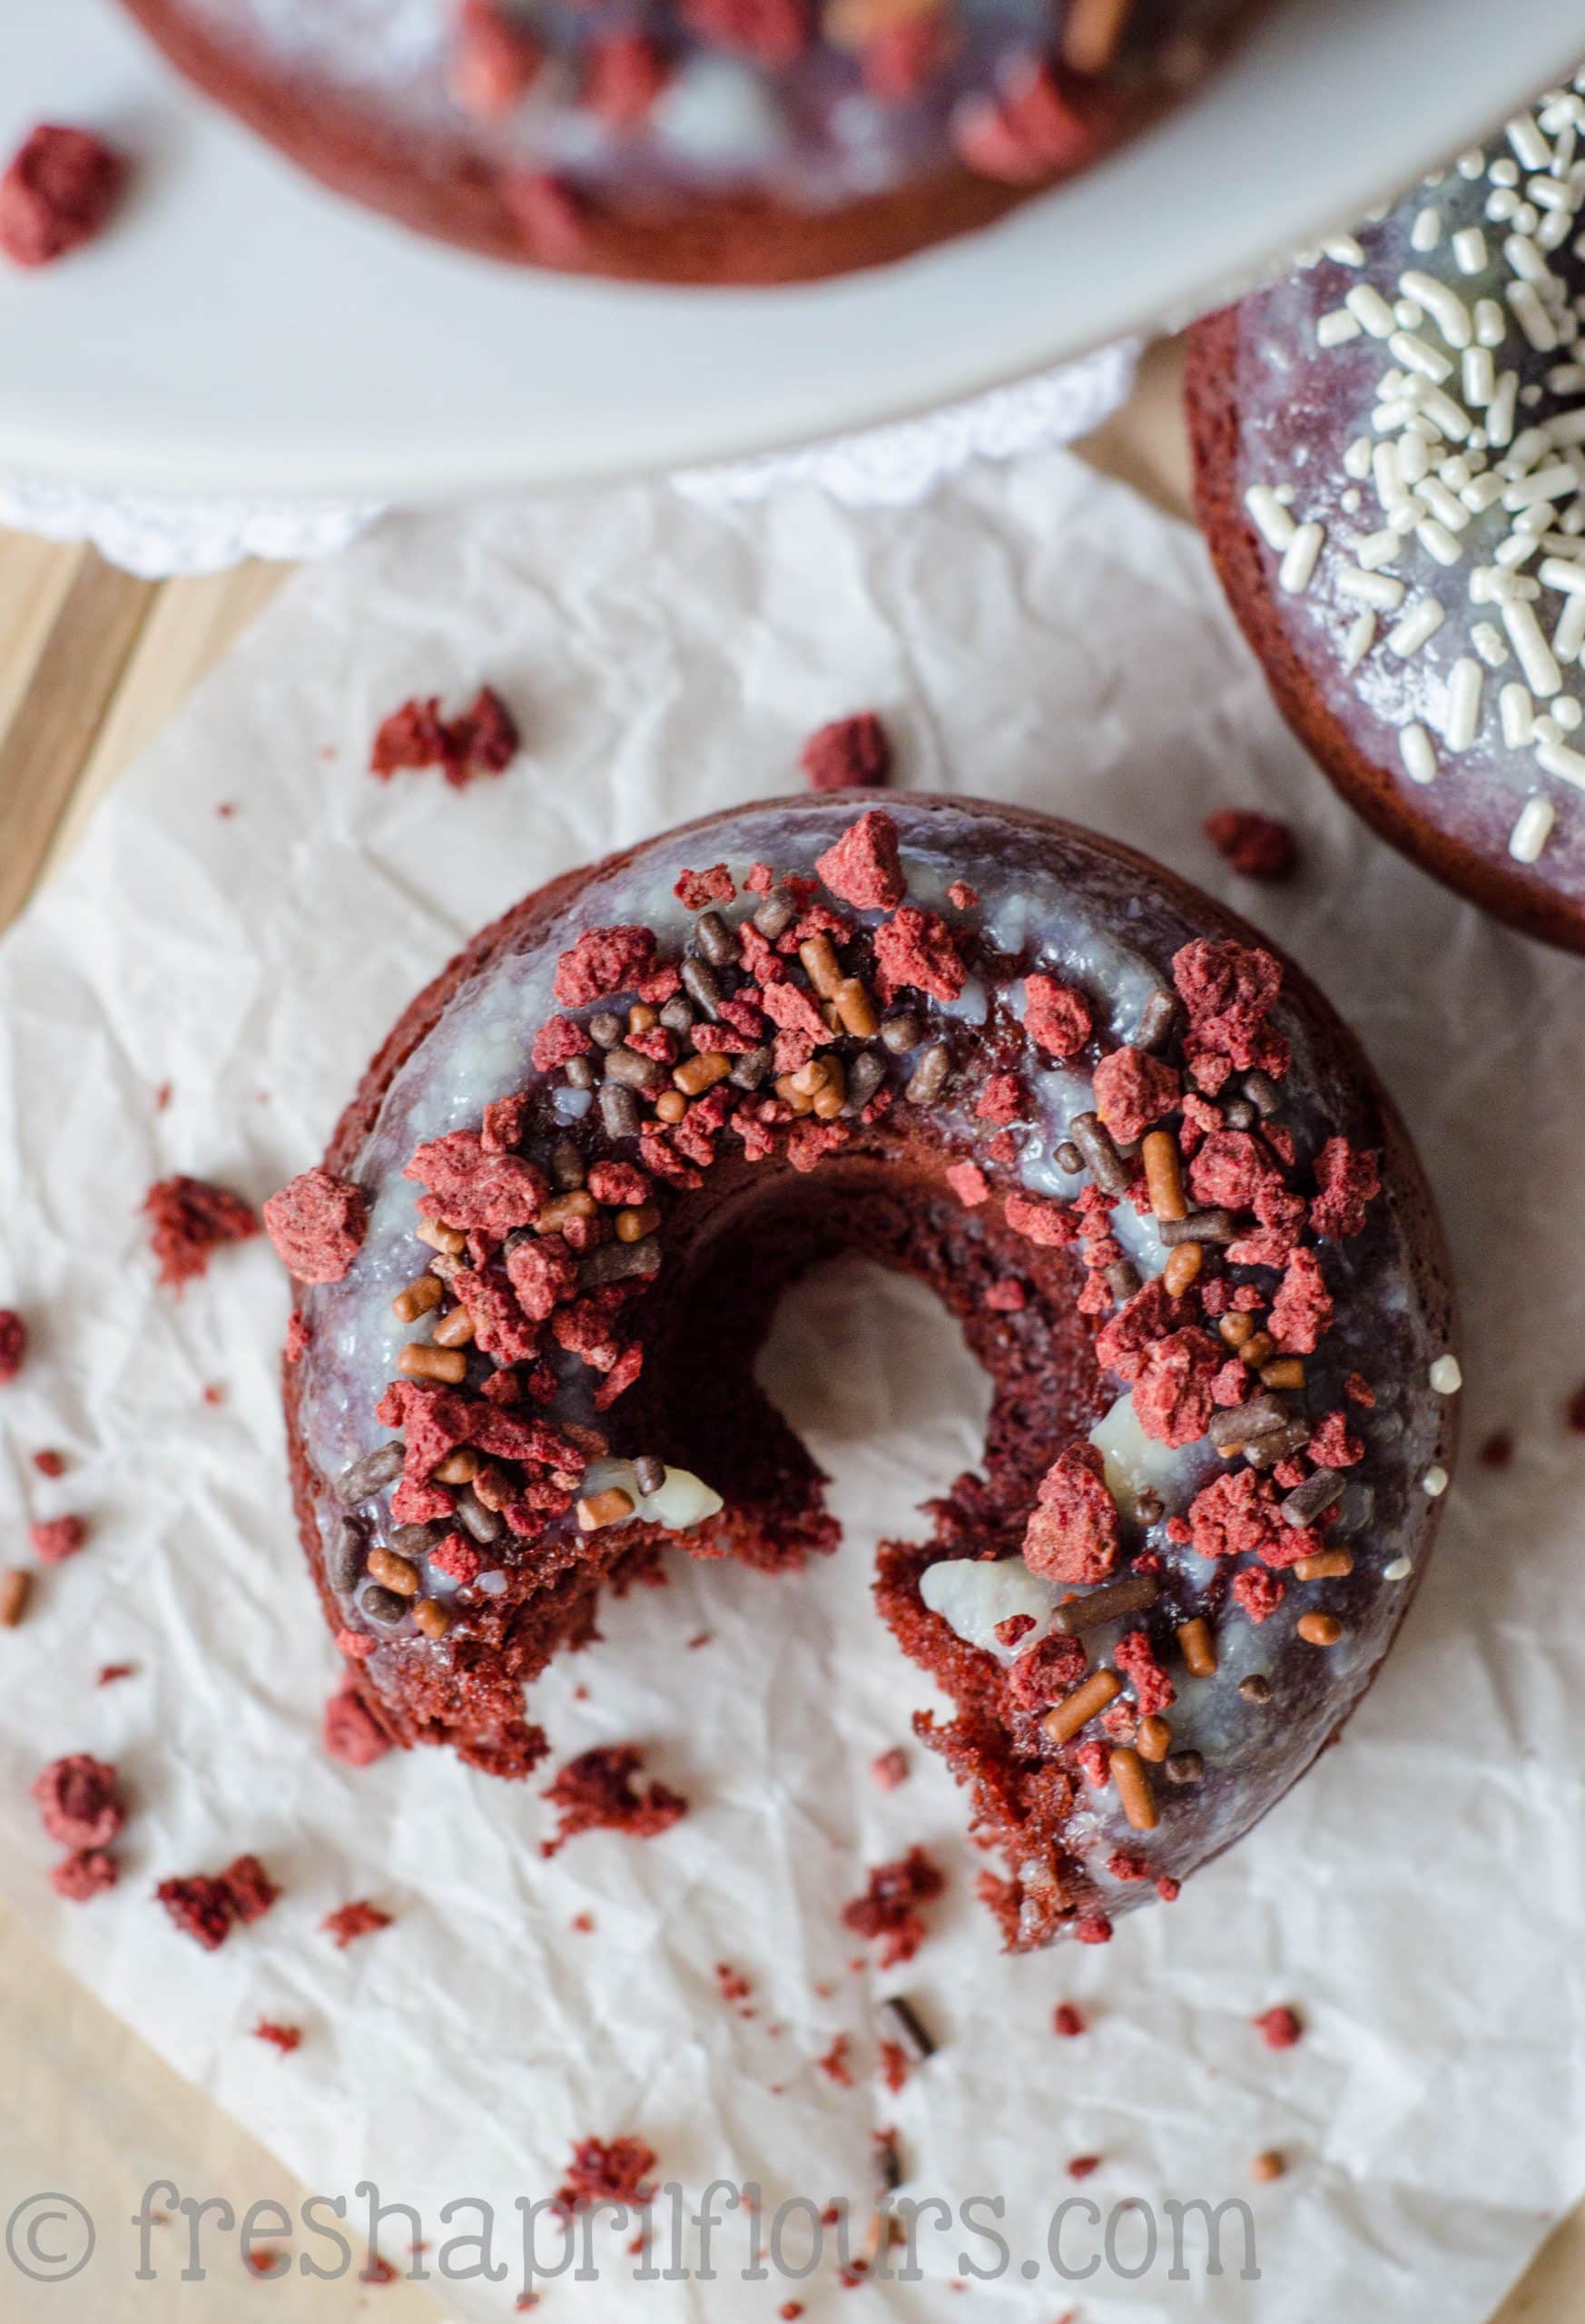 Baked Red Velvet Donuts: Fluffy, lightly sweetened and delicately tangy baked red velvet donuts topped with cream cheese glaze.